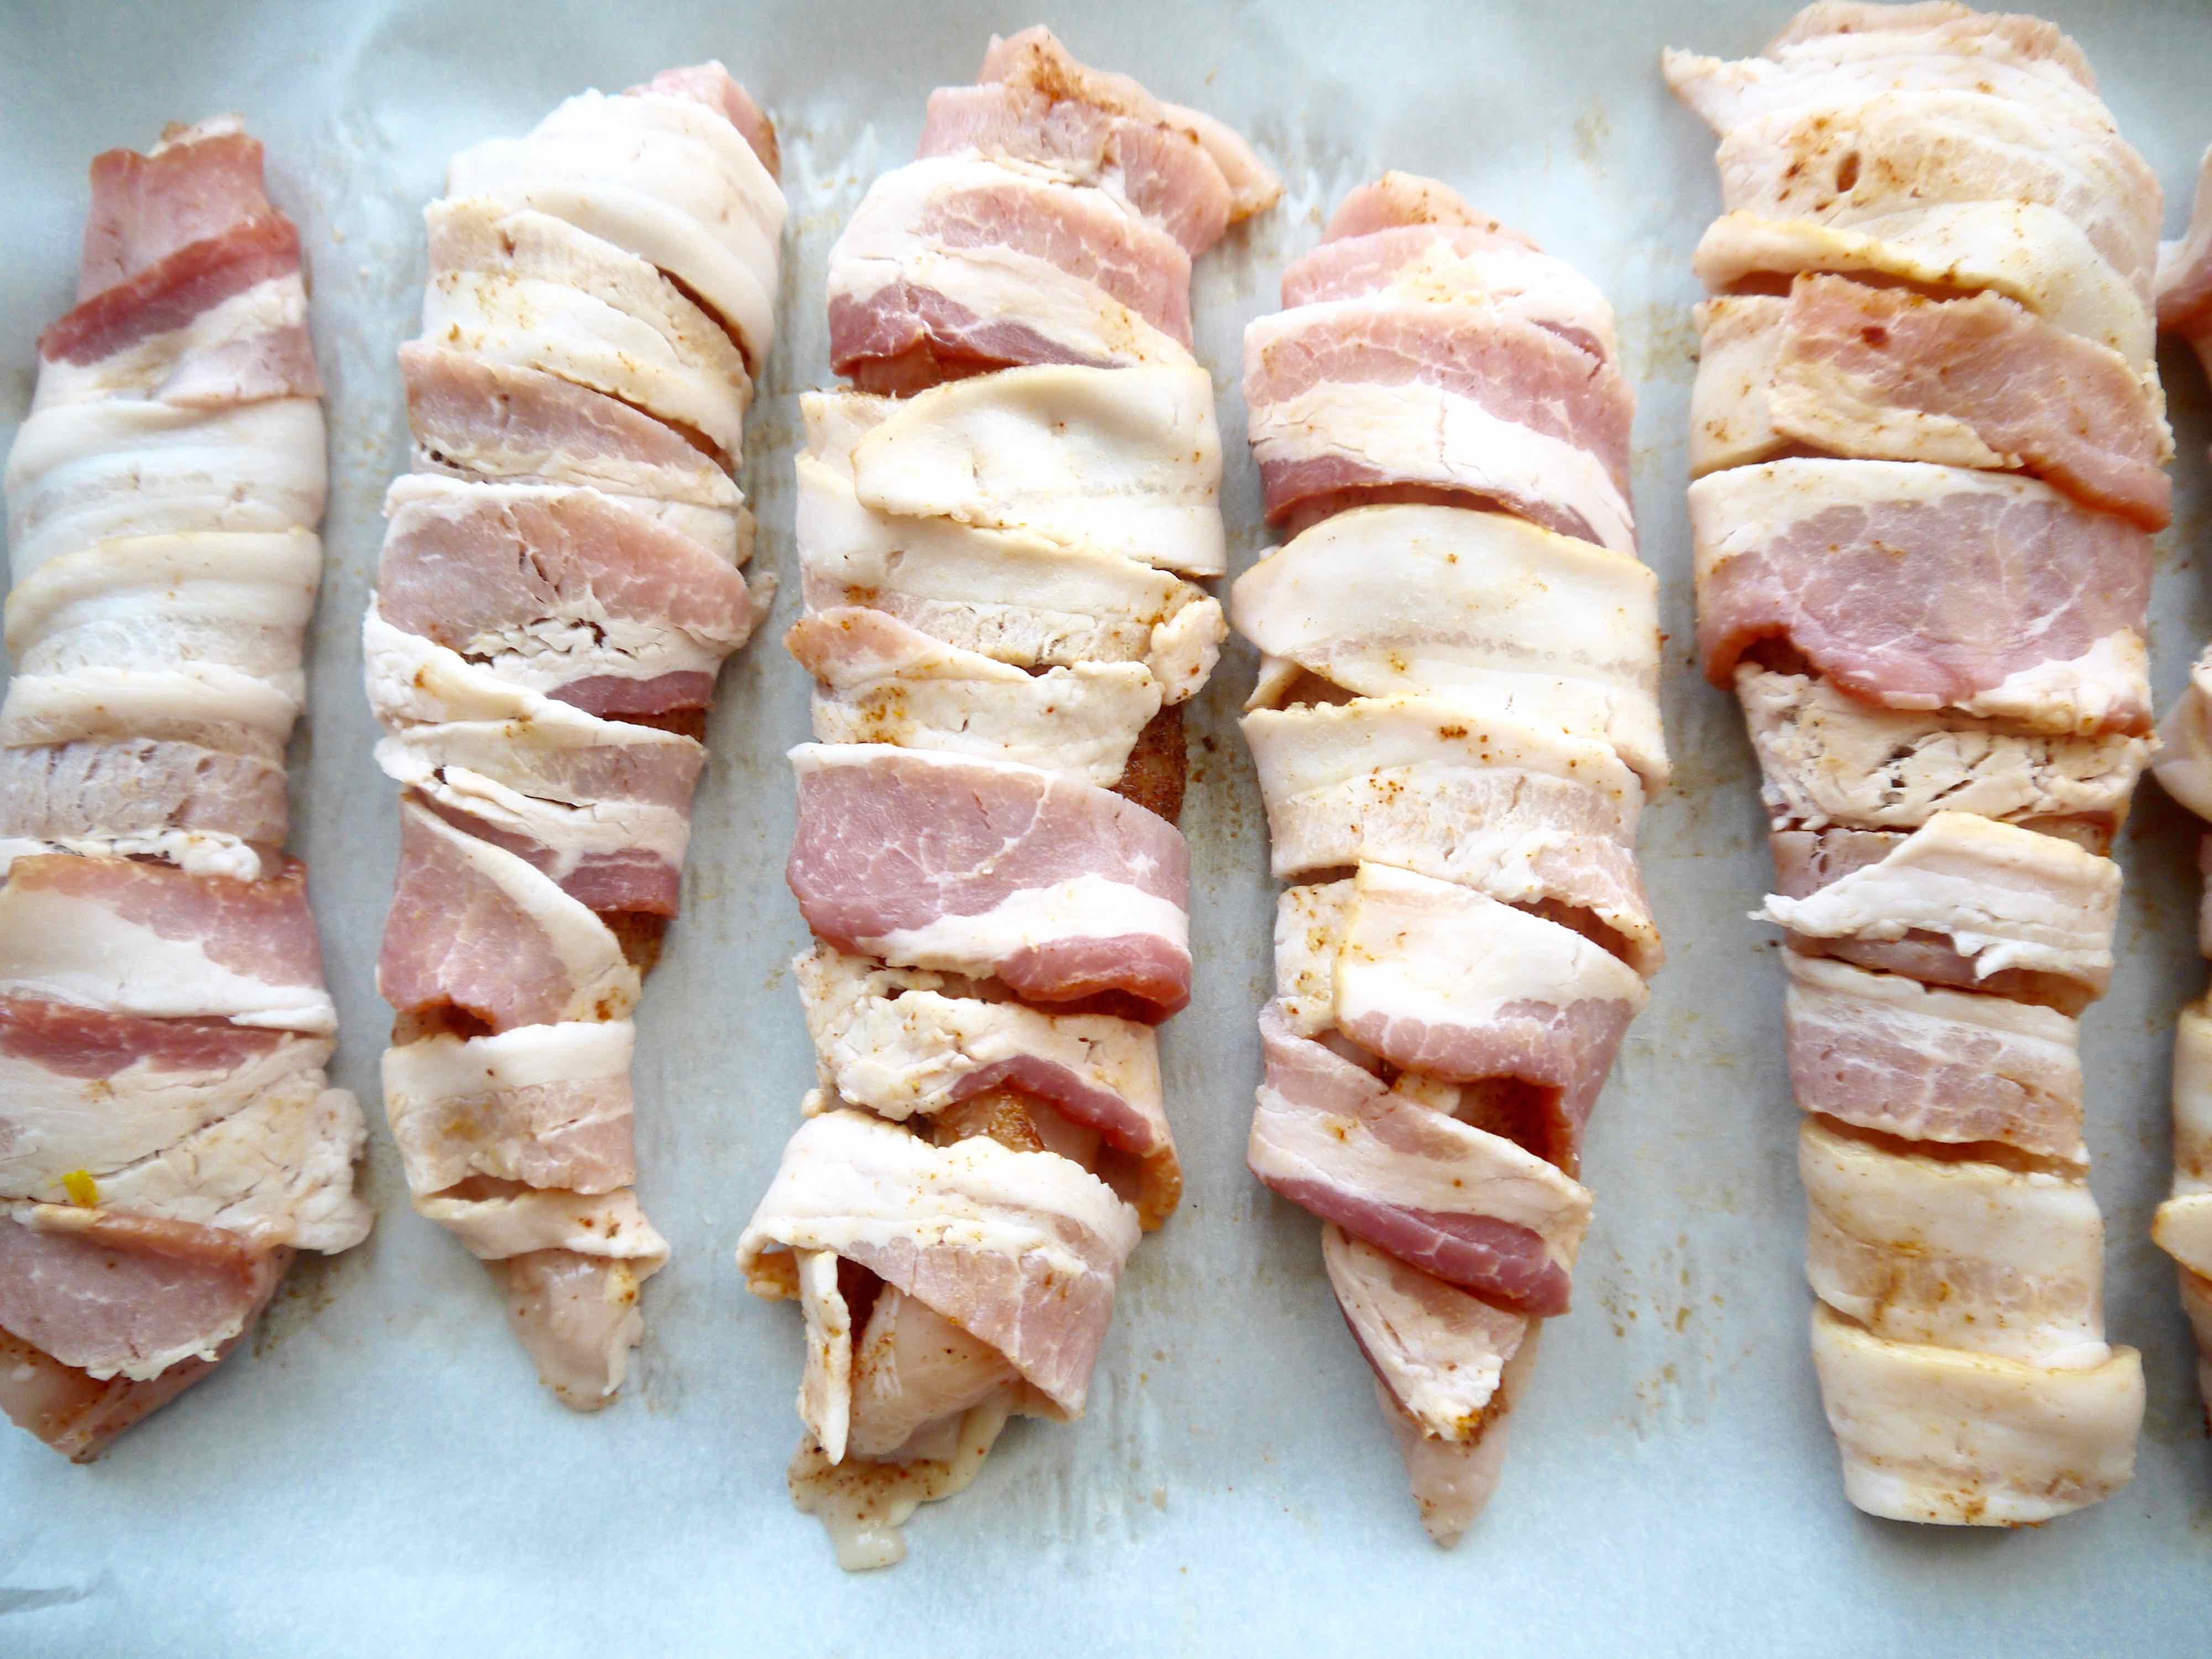 Chicken wrapped in bacon before cooking.